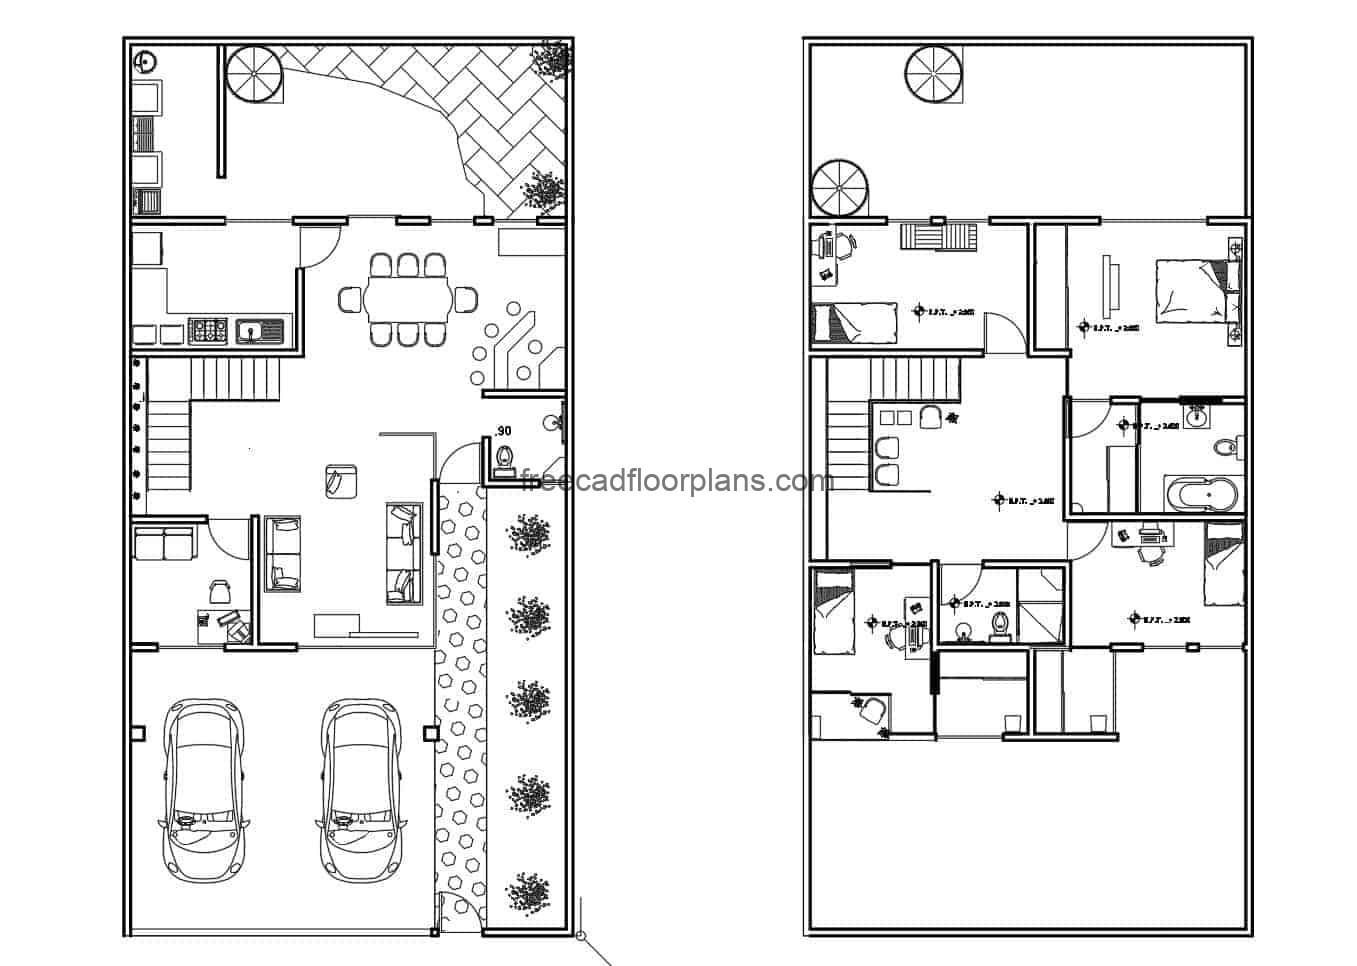 Two-level house plan with rectangular shape, drawing in DWG format with interior blocks, architectural and dimensional plan.